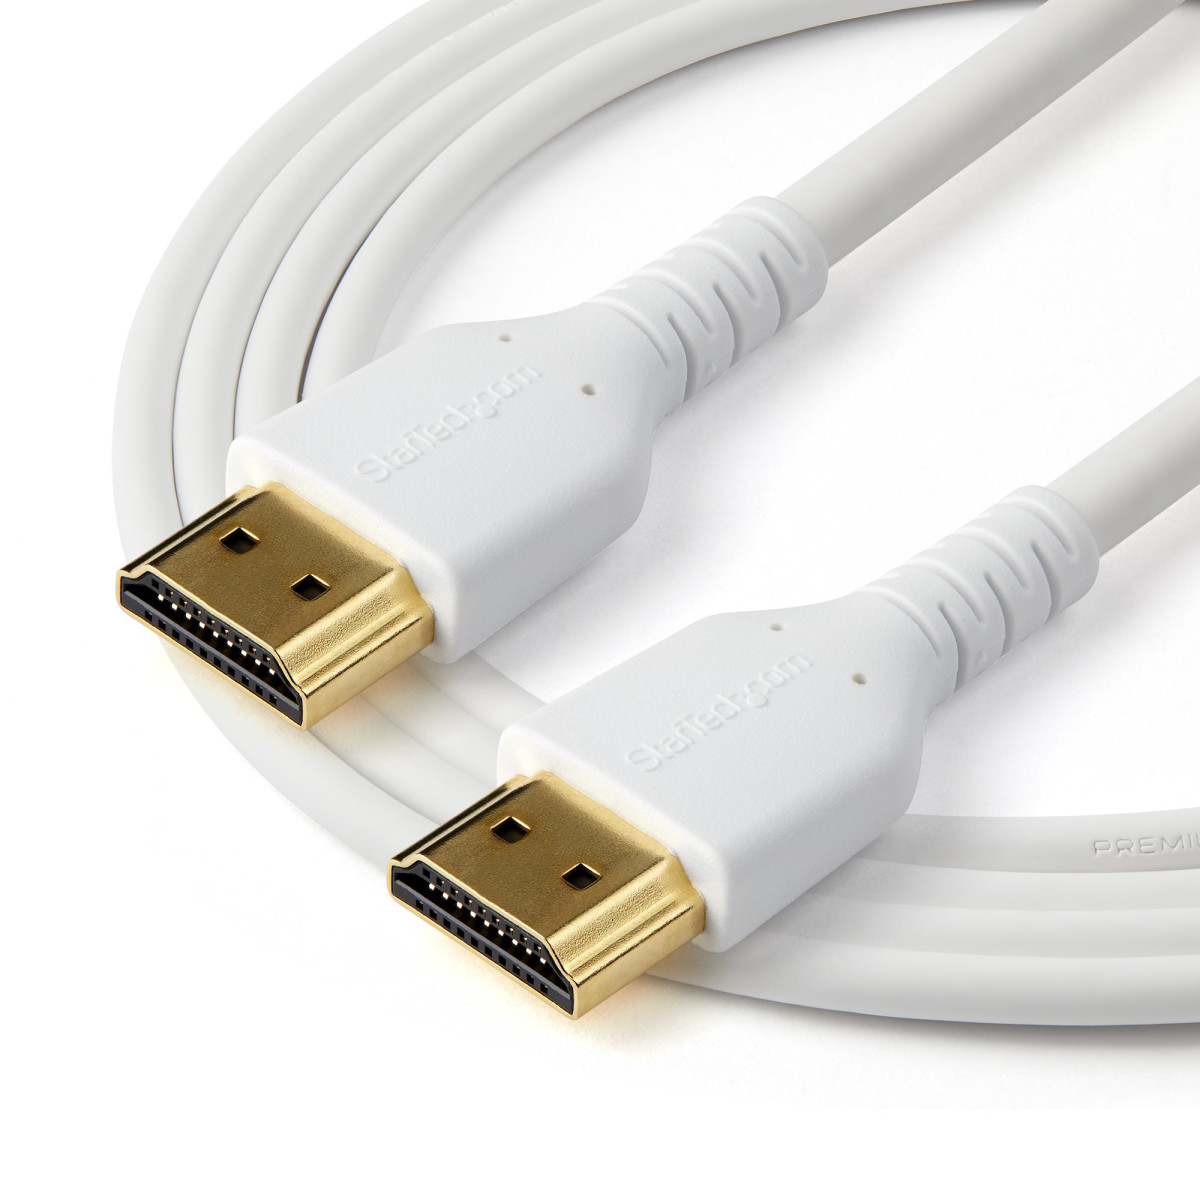 Cable - White High Speed HDMI Cable 1m